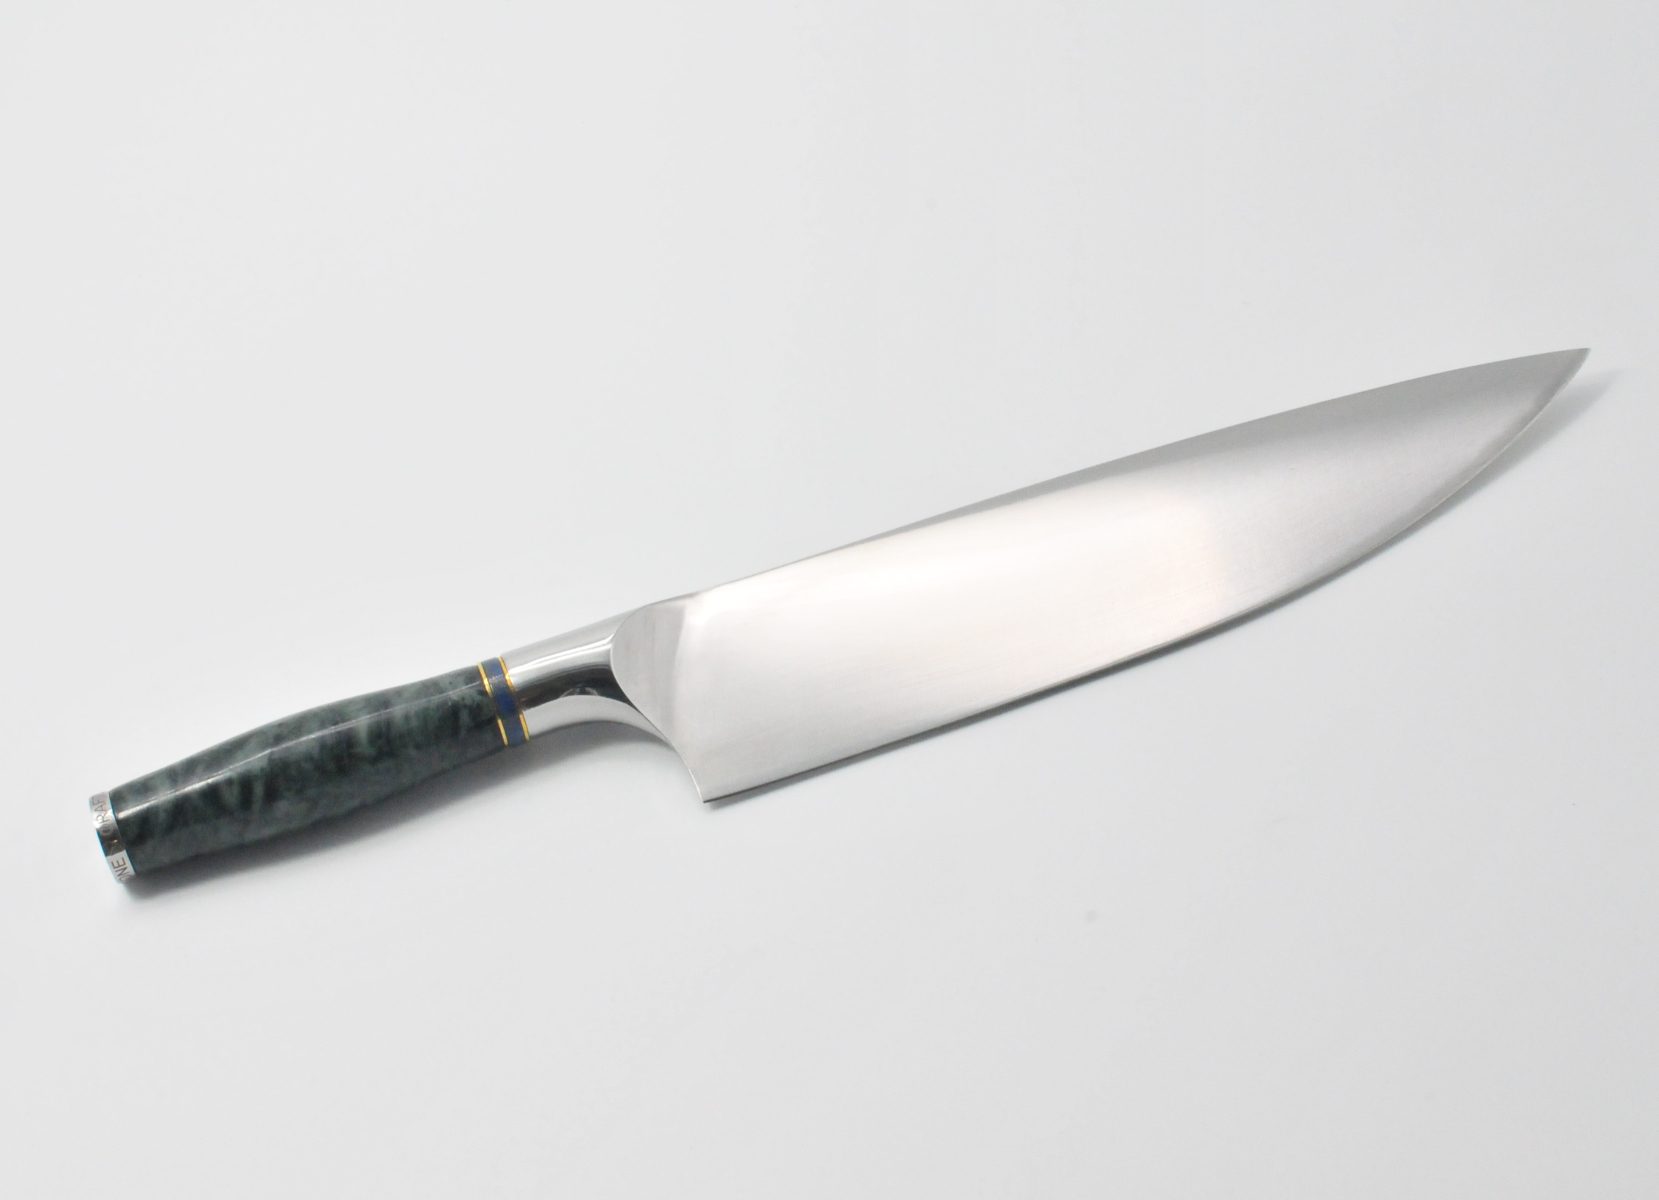 https://www.craftstoneknives.com/wp-content/uploads/bfi_thumb/10-Inch-Chef-Knife-with-a-Dark-Indian-Green-Marble-Handle-Swiss-Blue-Cubic-Zirconia-Stone-at-the-Back-of-the-Knife-Lapis-and-Brass-Decorative-Rings-39d9c25qechk2bywfo3eh6.jpg